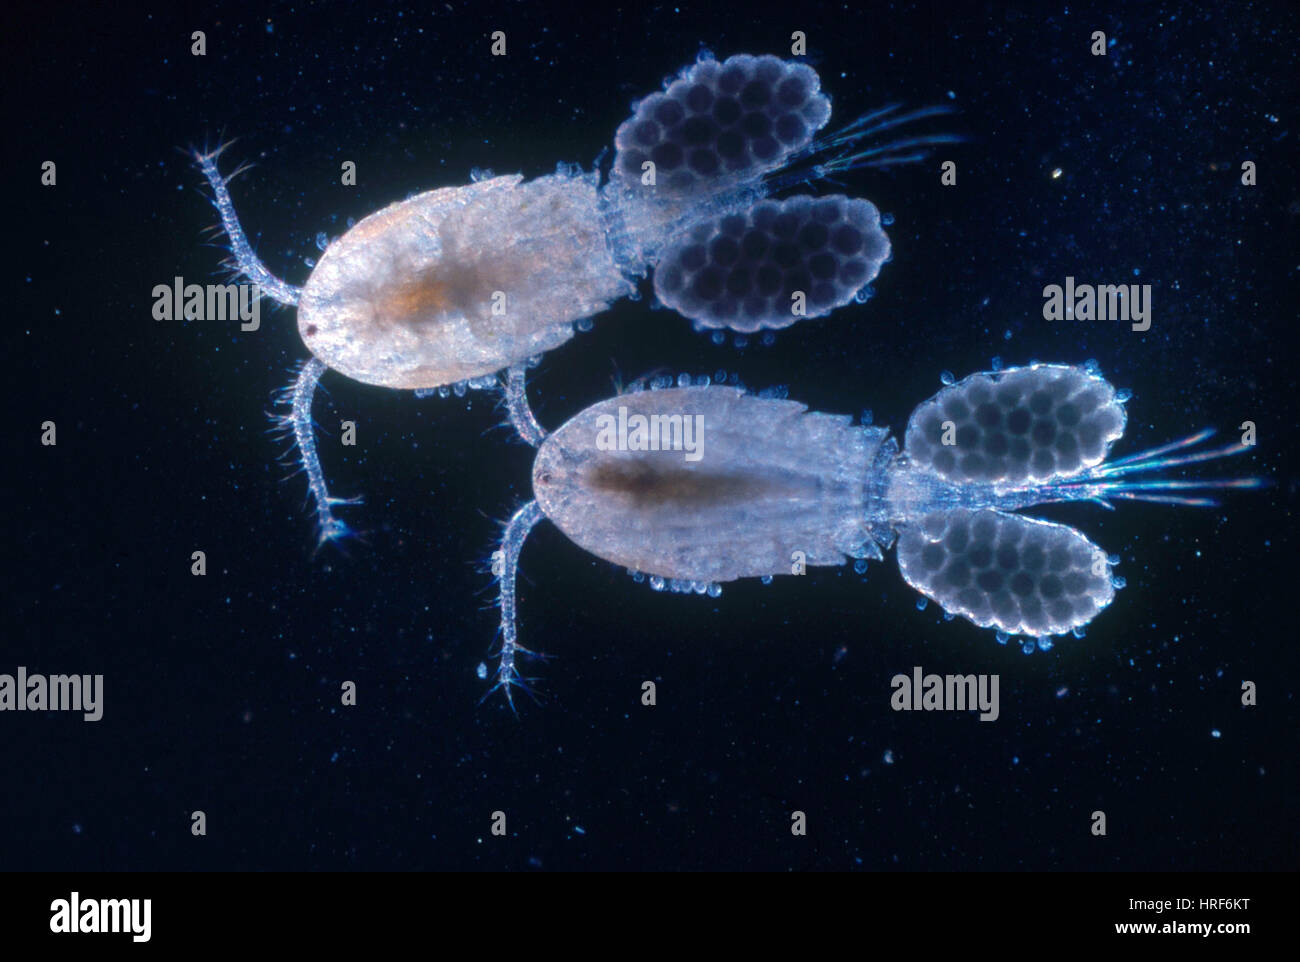 Copepods with Eggs, LM Stock Photo